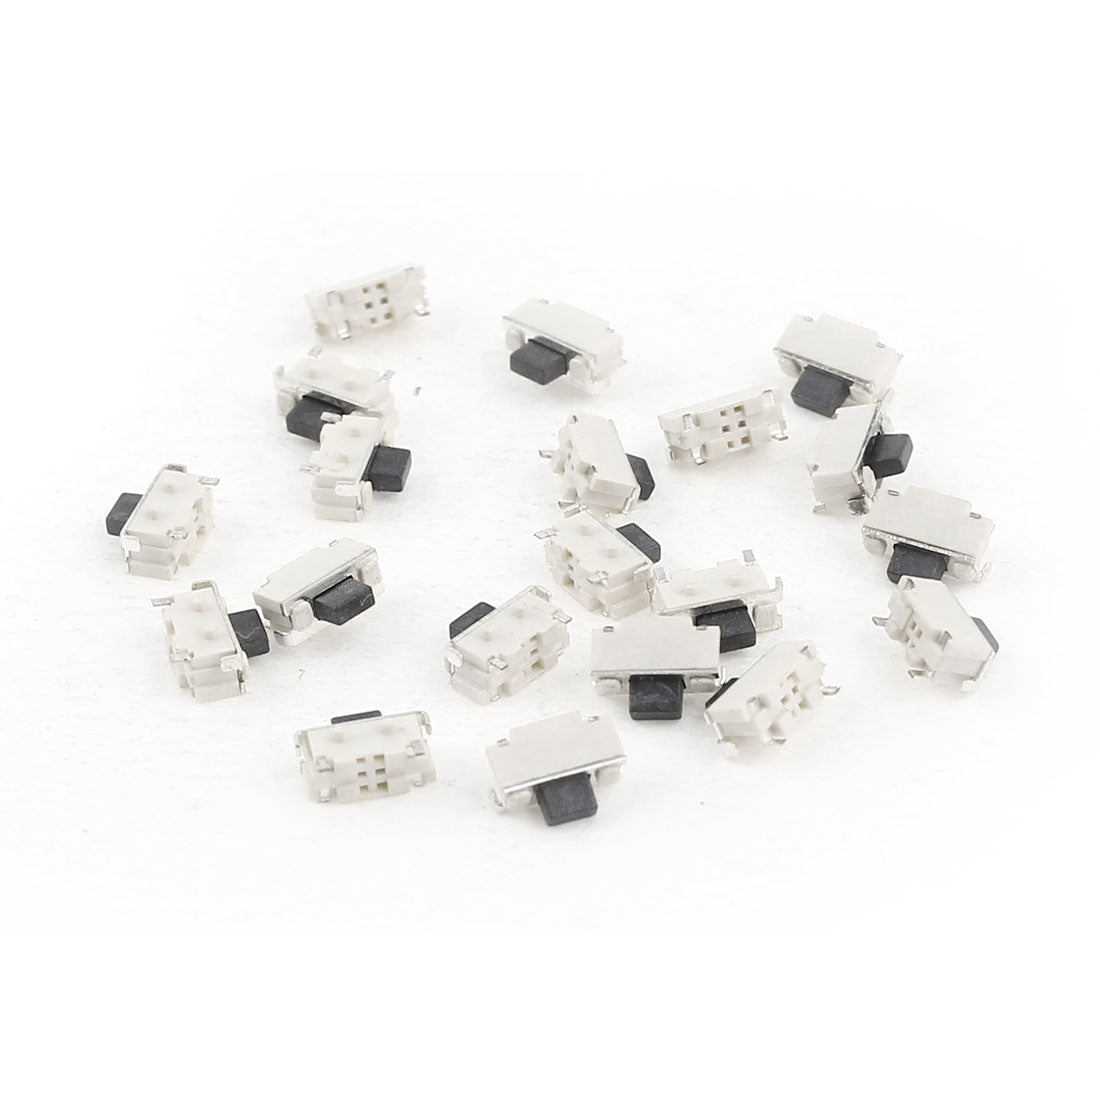 uxcell Uxcell 20PCS Surface Mounted Devices 2-Terminal SPST Momentary Push Button Mini Tactile Switch 5mmx2mm